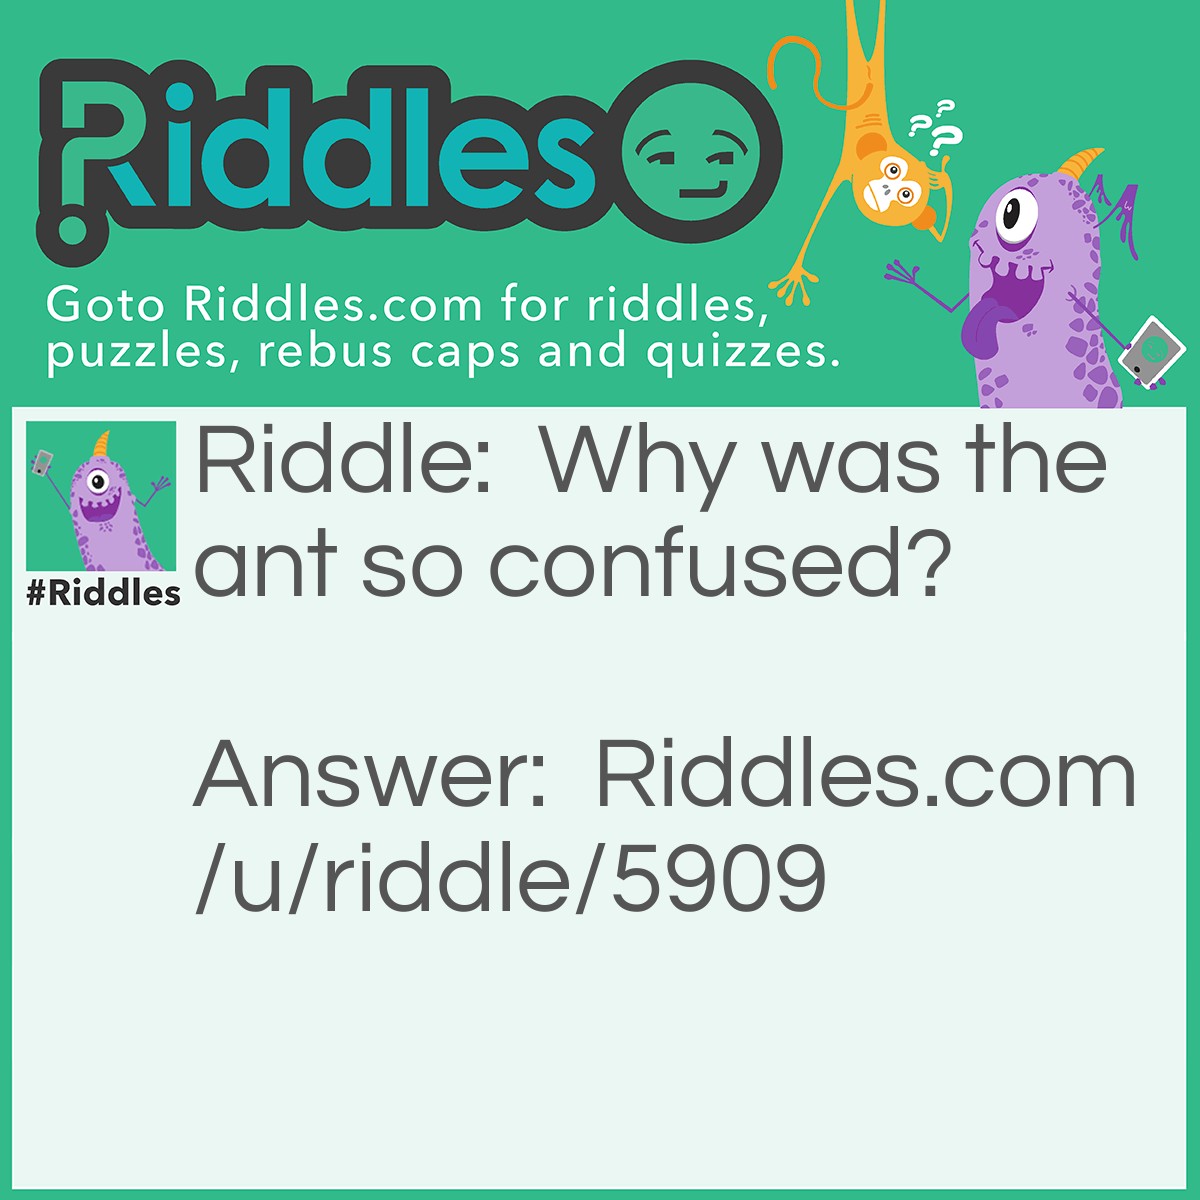 Riddle: Why was the ant so confused? Answer: Because it didn't know which ants were his aunts.